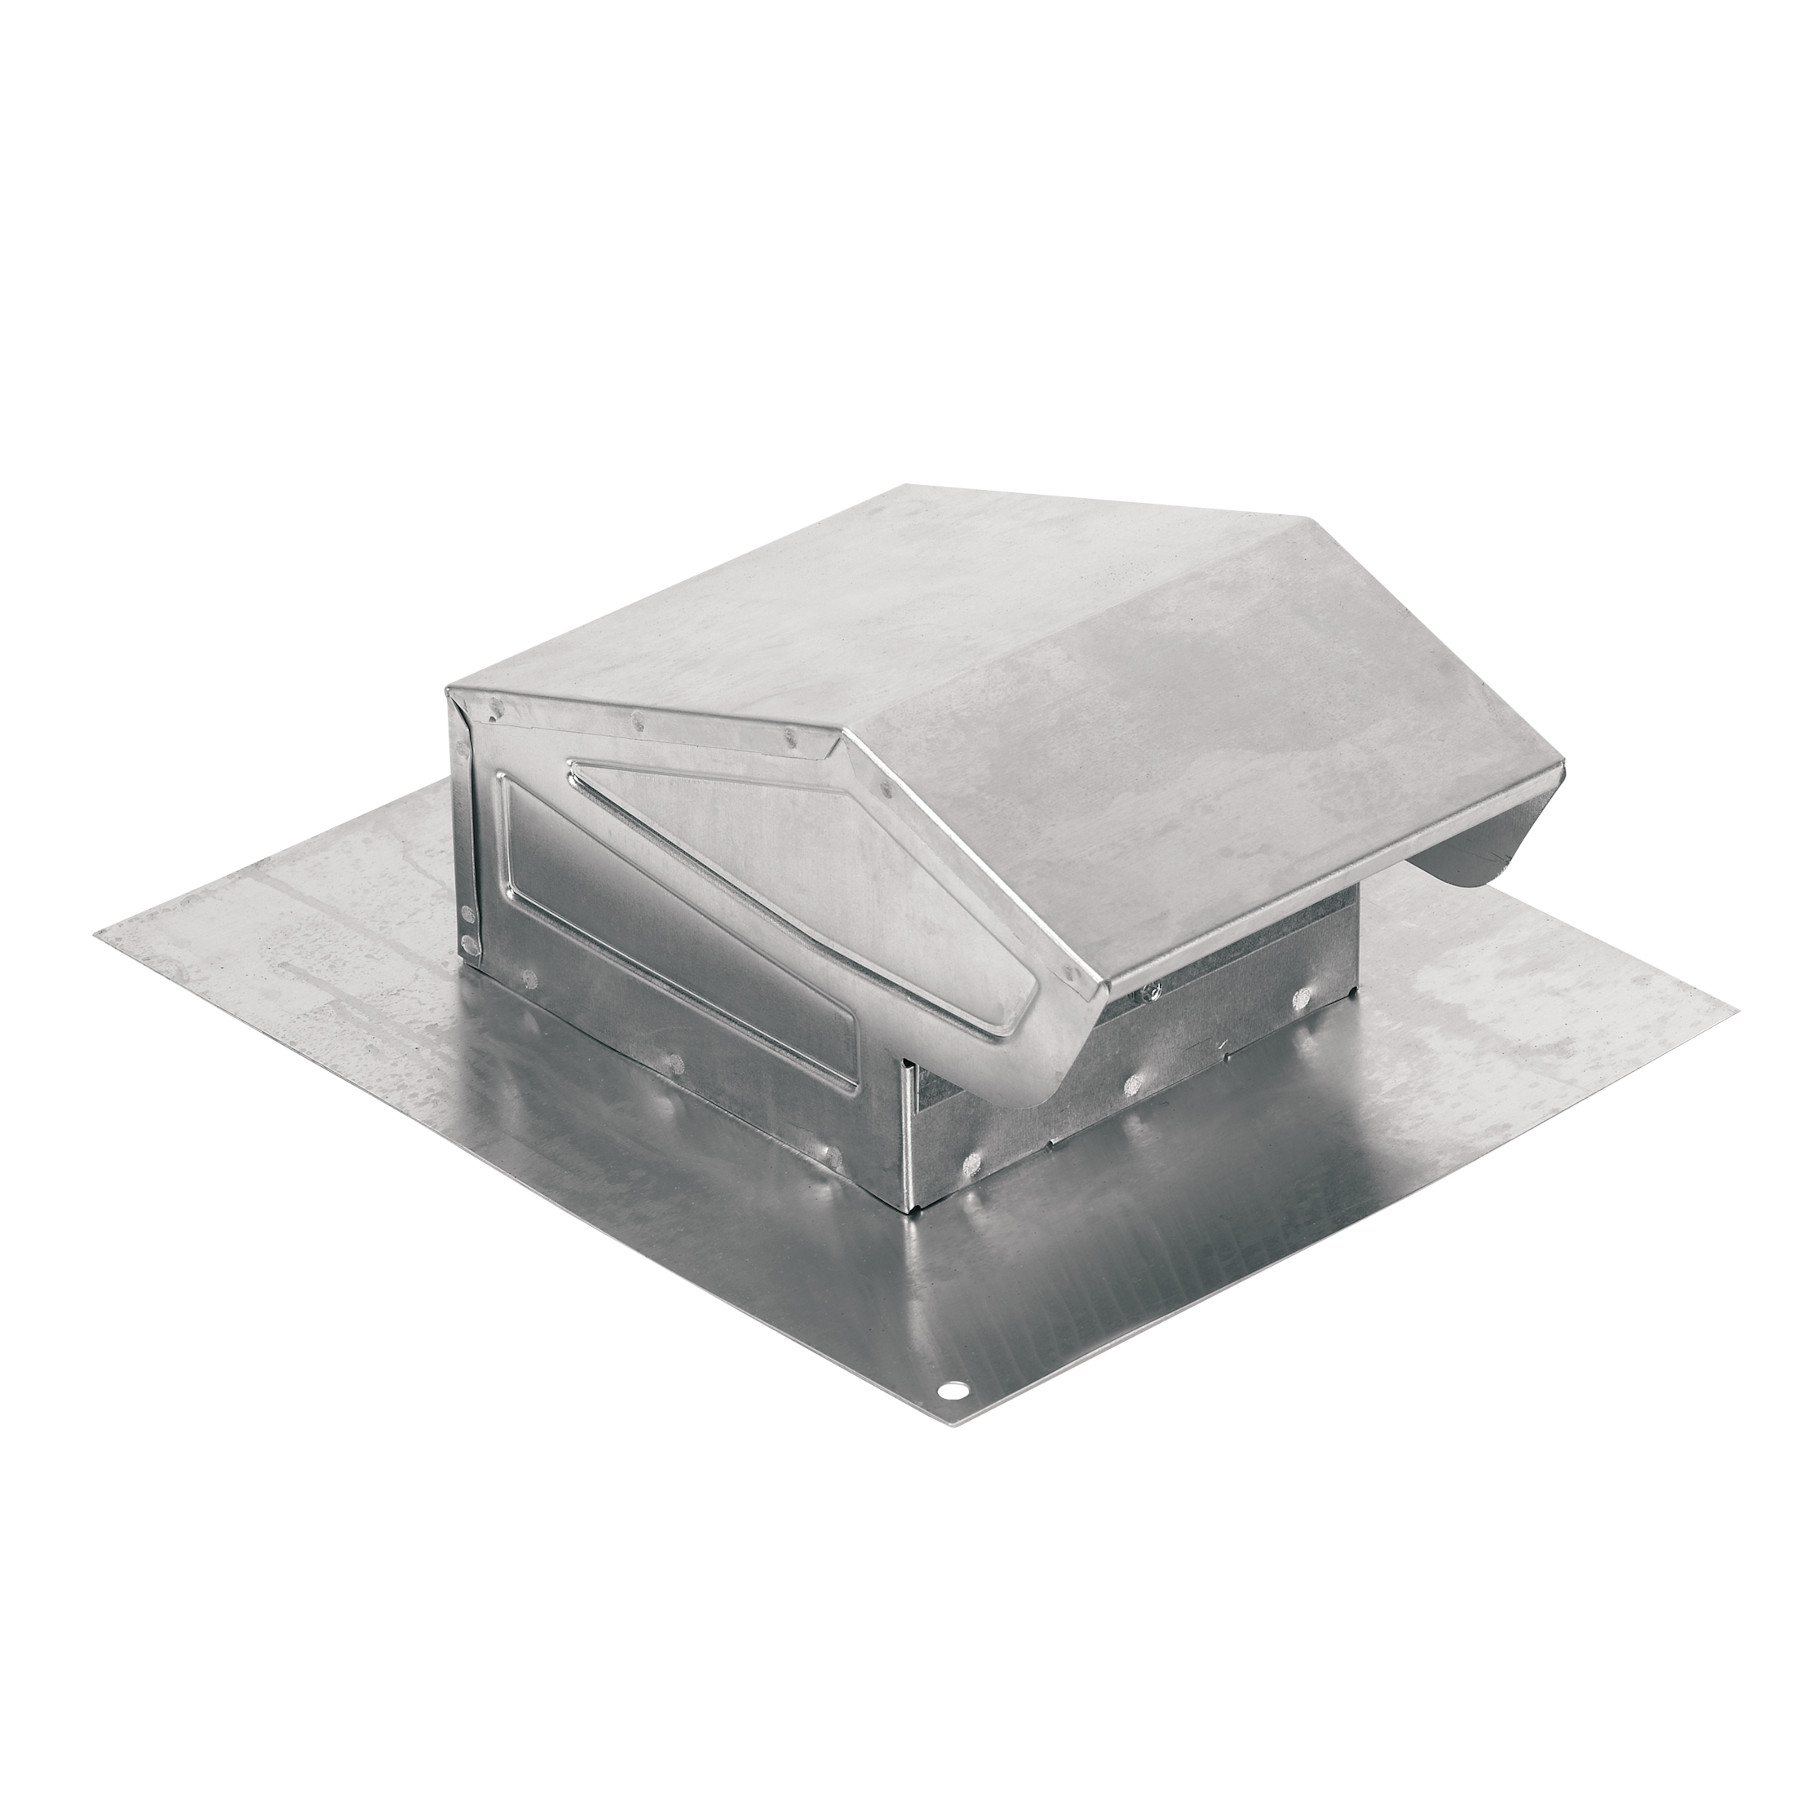 636al Broan Nutone Roof Cap Aluminum For 3 Inch Or 4 Inch Round Duct